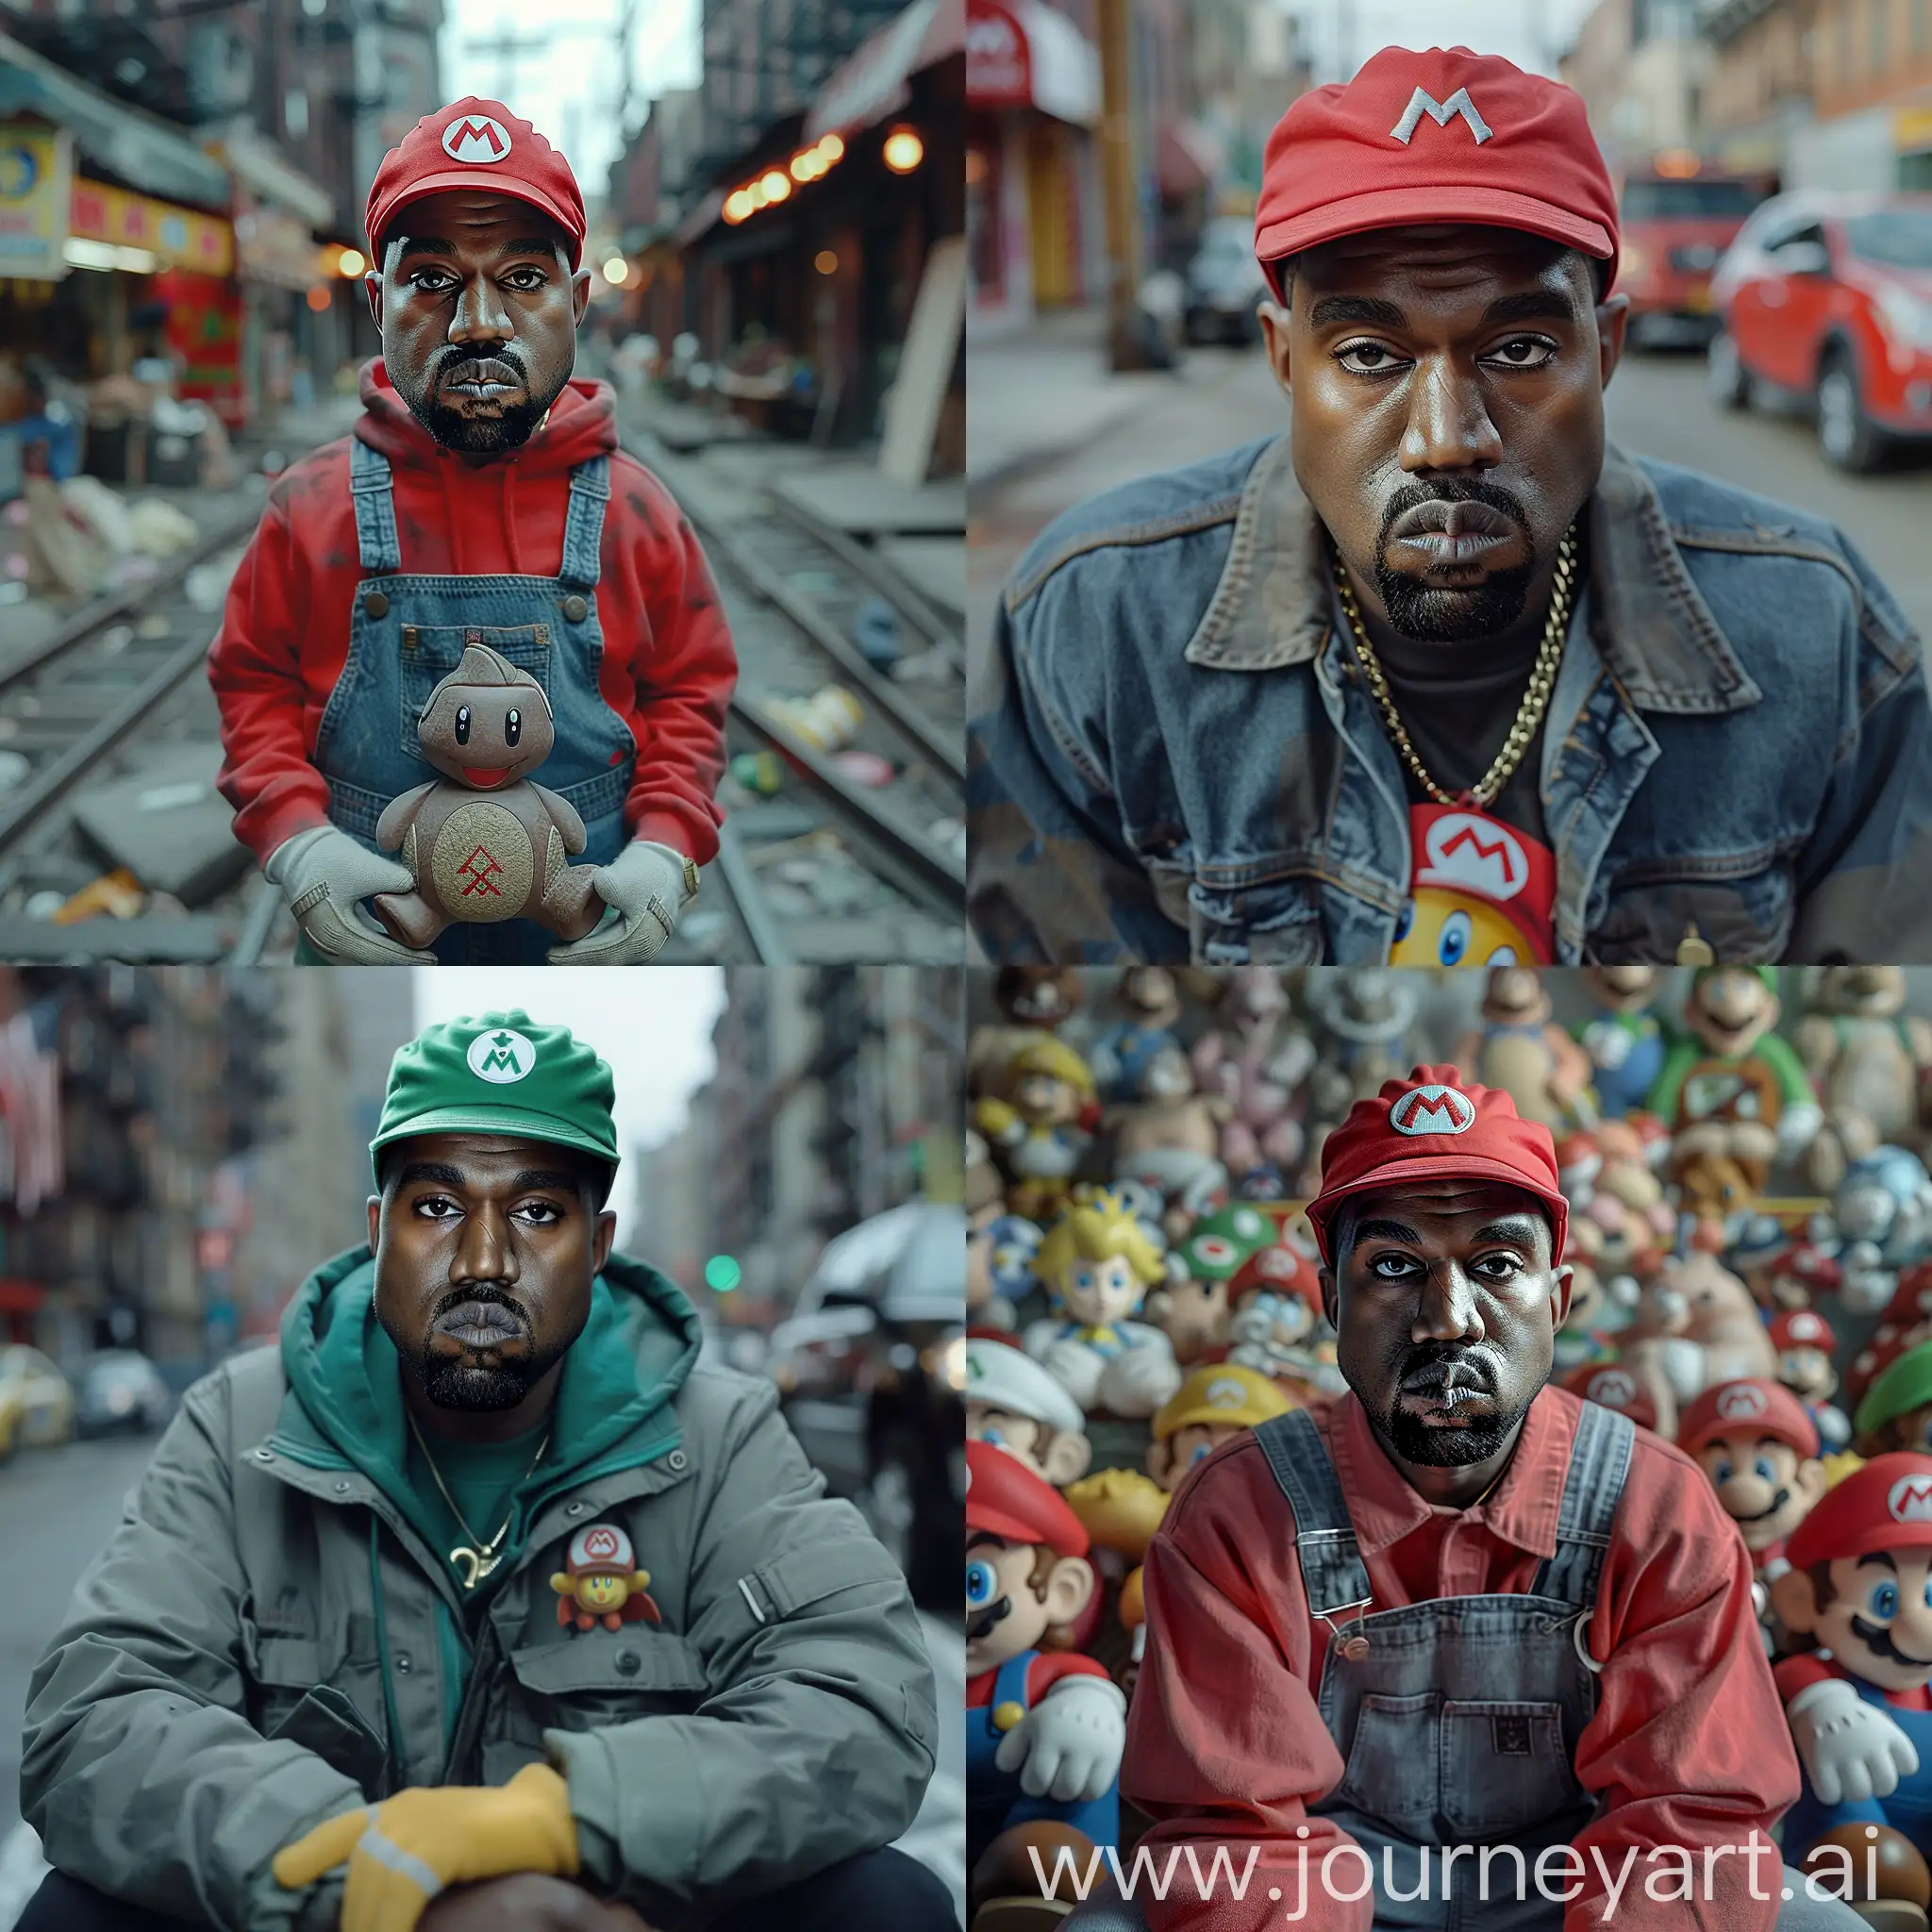 Realistic-Kanye-West-as-Wario-Iconic-Video-Game-Character-Stylized-in-Celebrity-Form